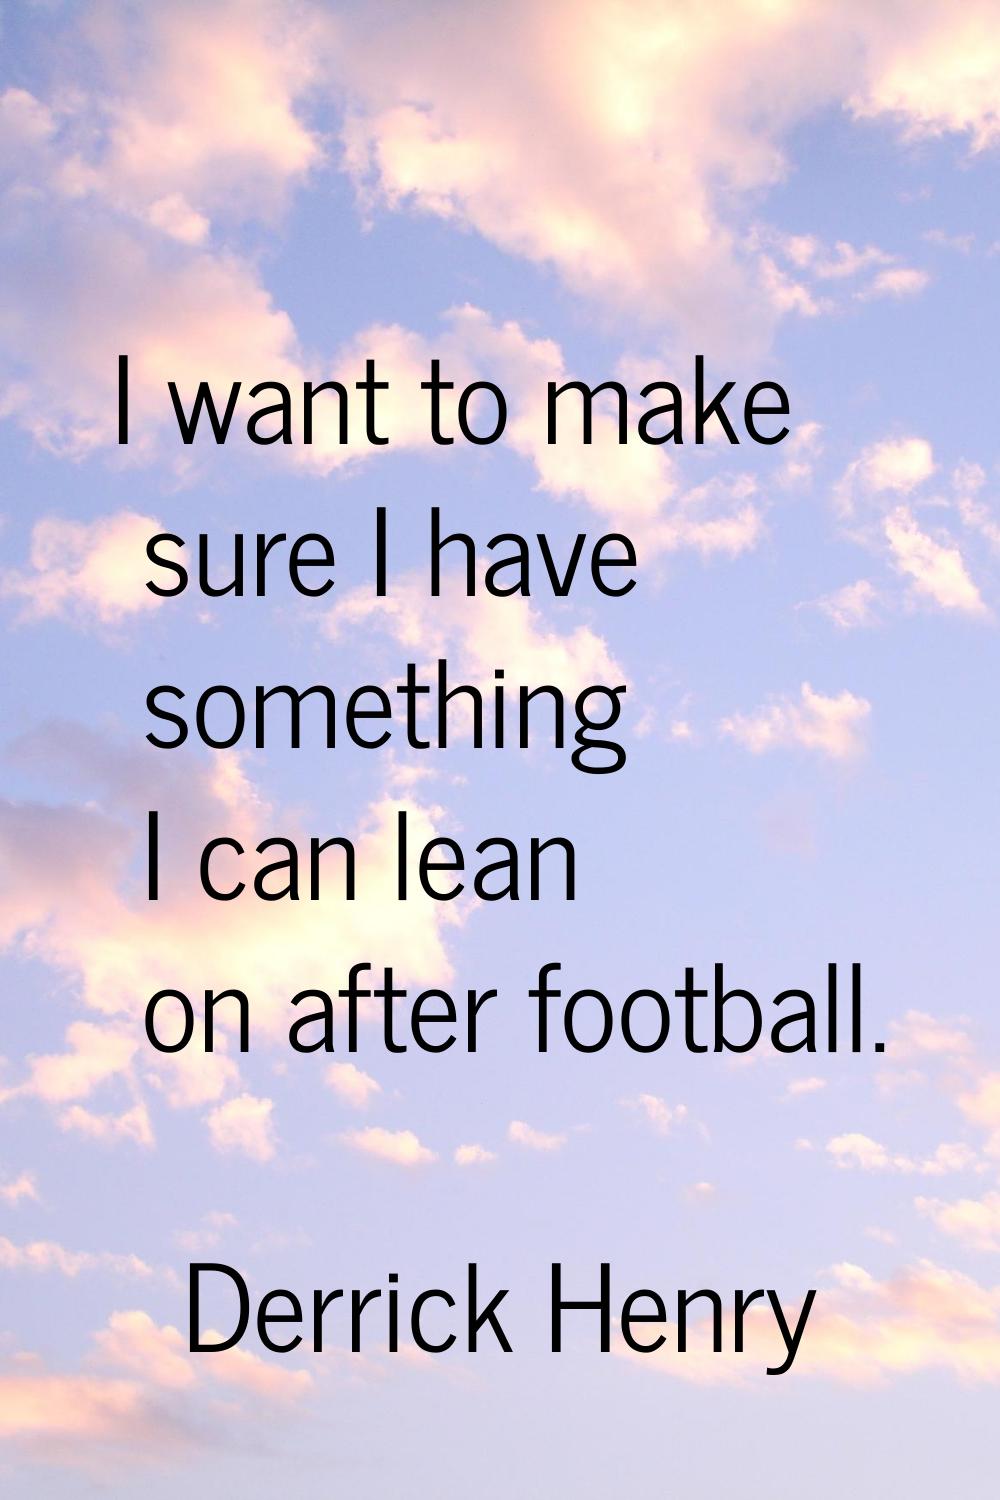 I want to make sure I have something I can lean on after football.